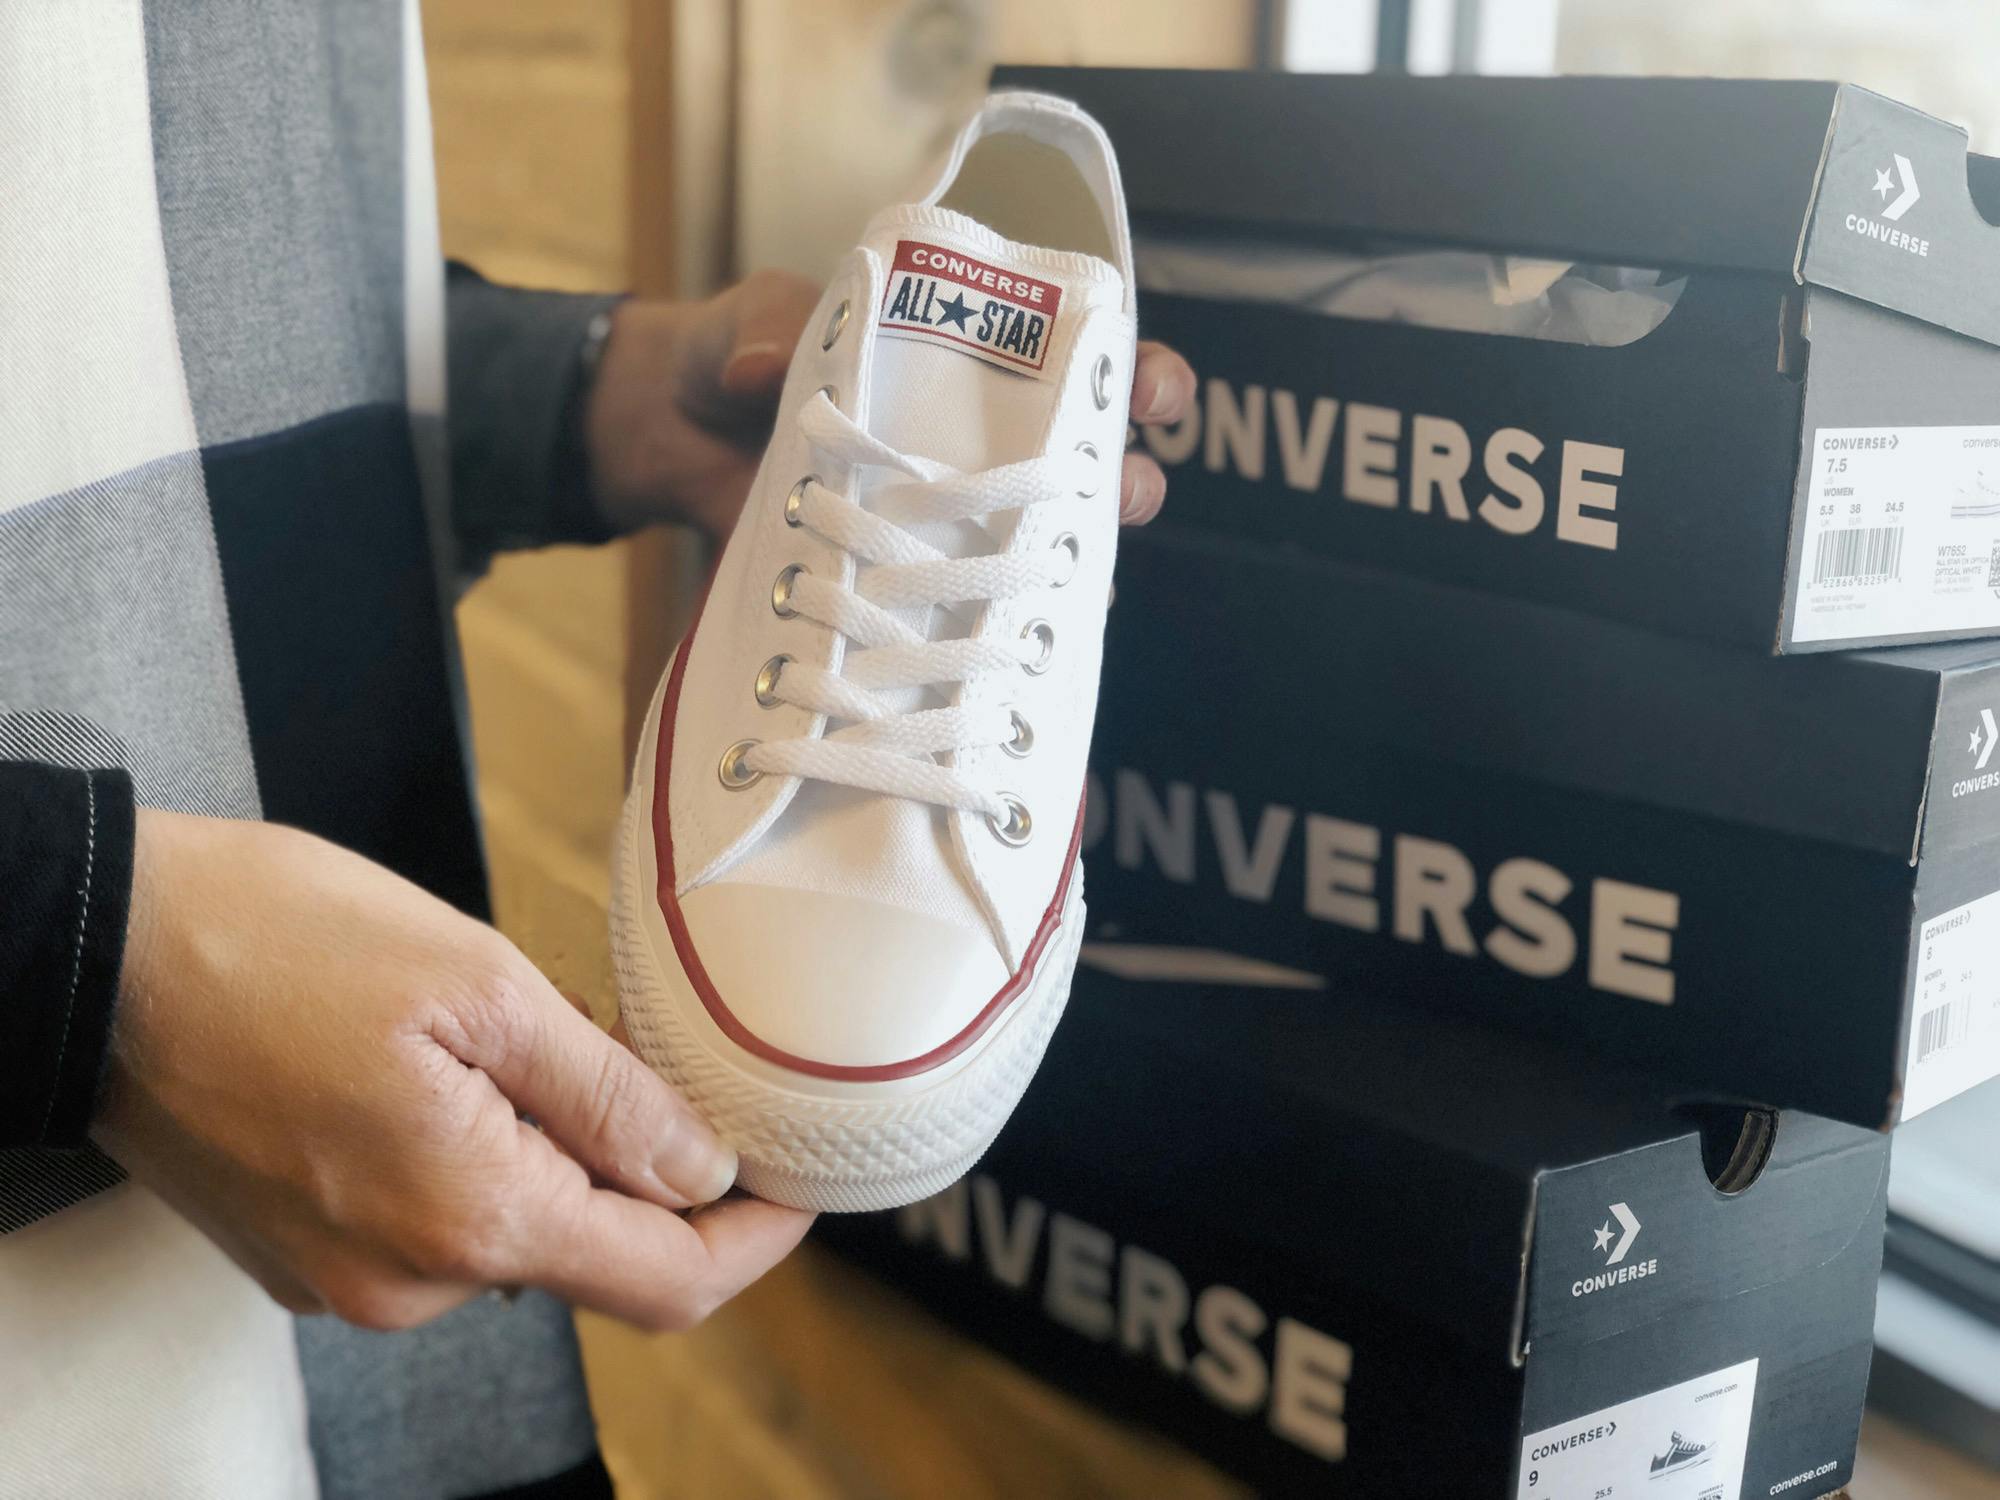 15 Converse Sales Tips and Tricks To 